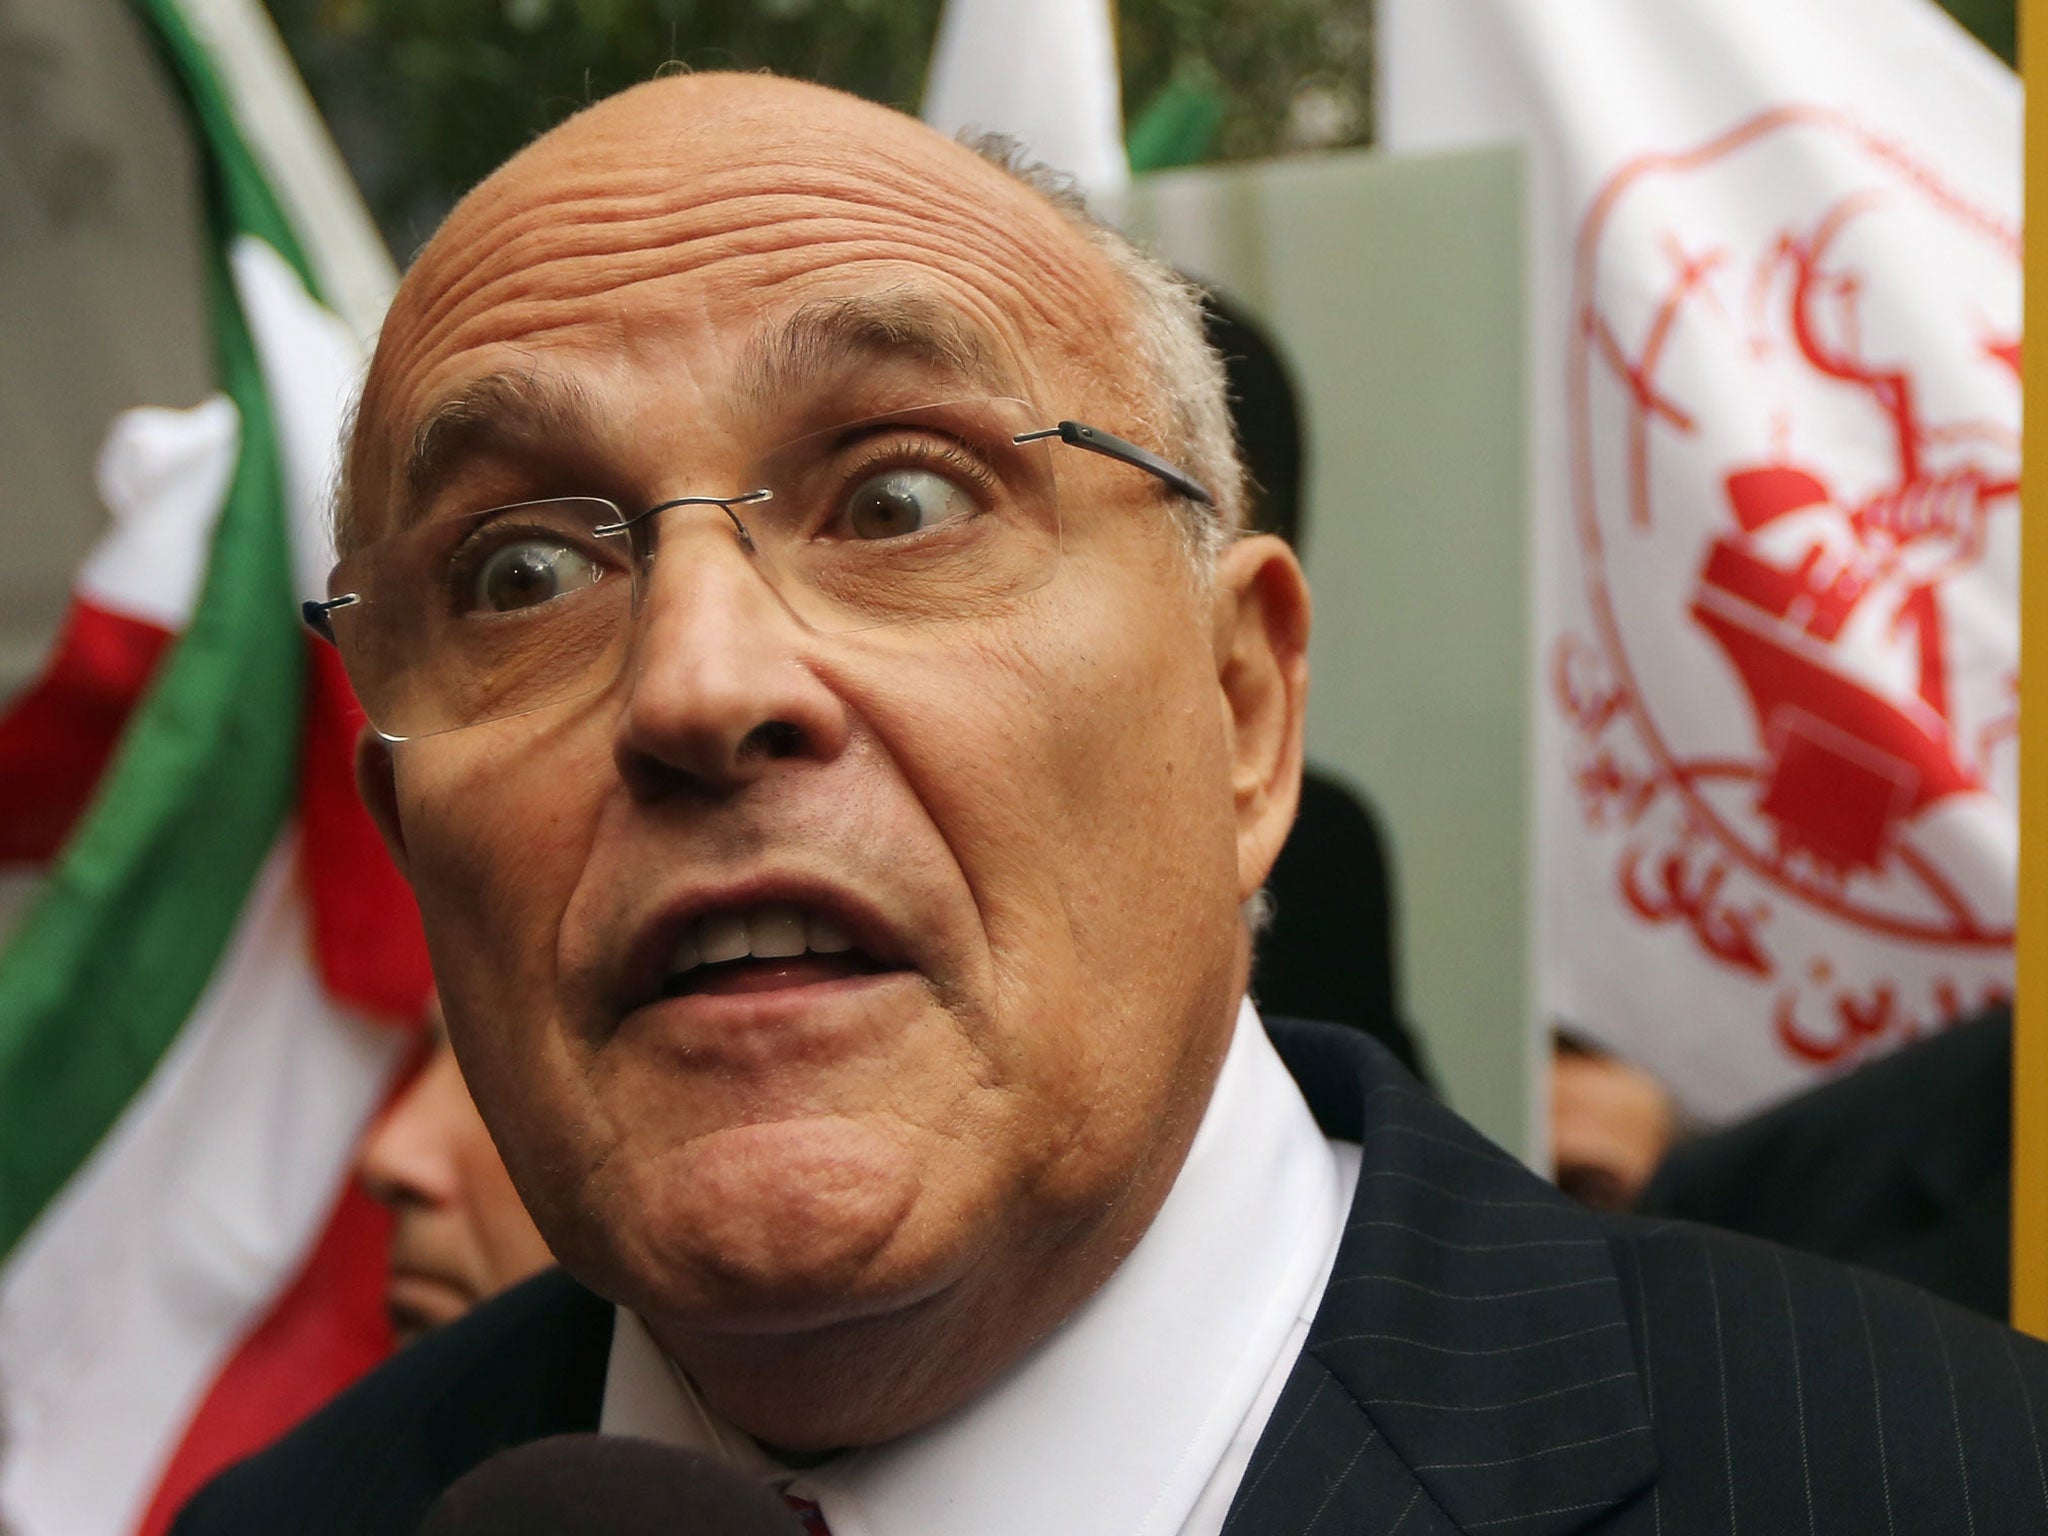 Former New York Mayor Rudolph Giuliani's business was sent a suspicious letter, but the substance enclosed was found to be unharmful.